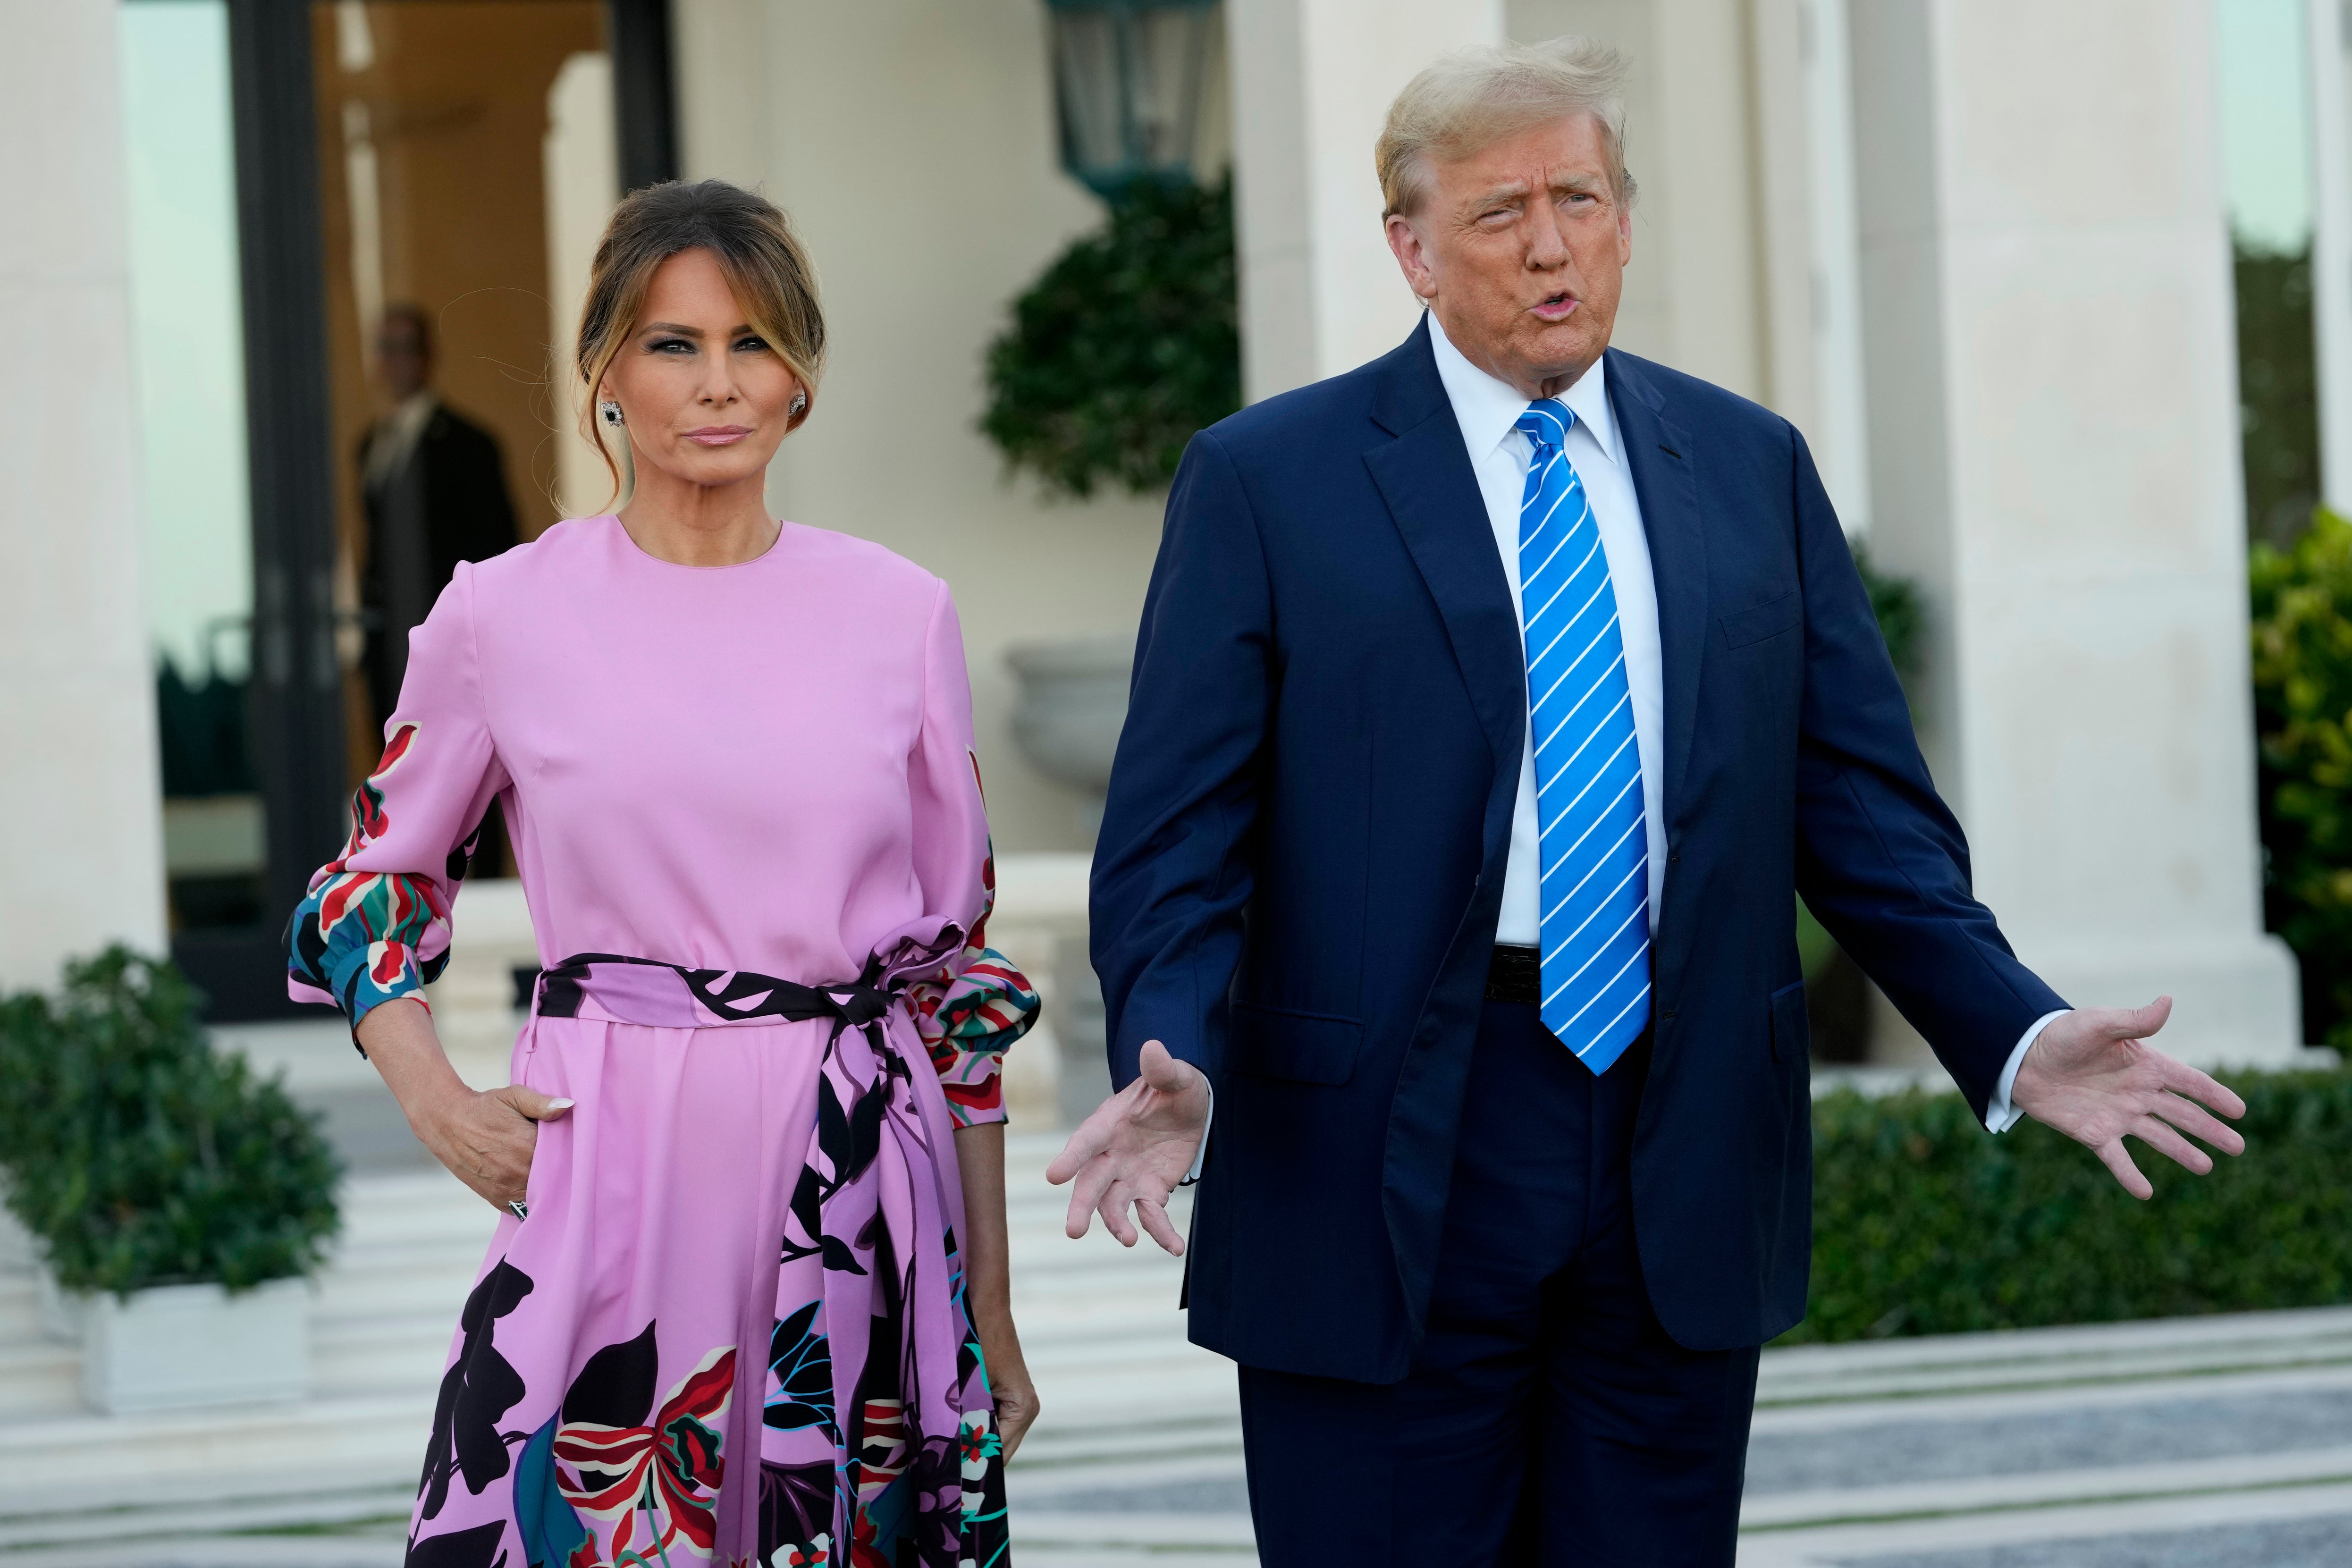 Melania Trump, pictured above with her husband in a rare appearance at Palm Beach, Florida election fundraiser on 13 April, has reportedly voiced her opposition to the trial